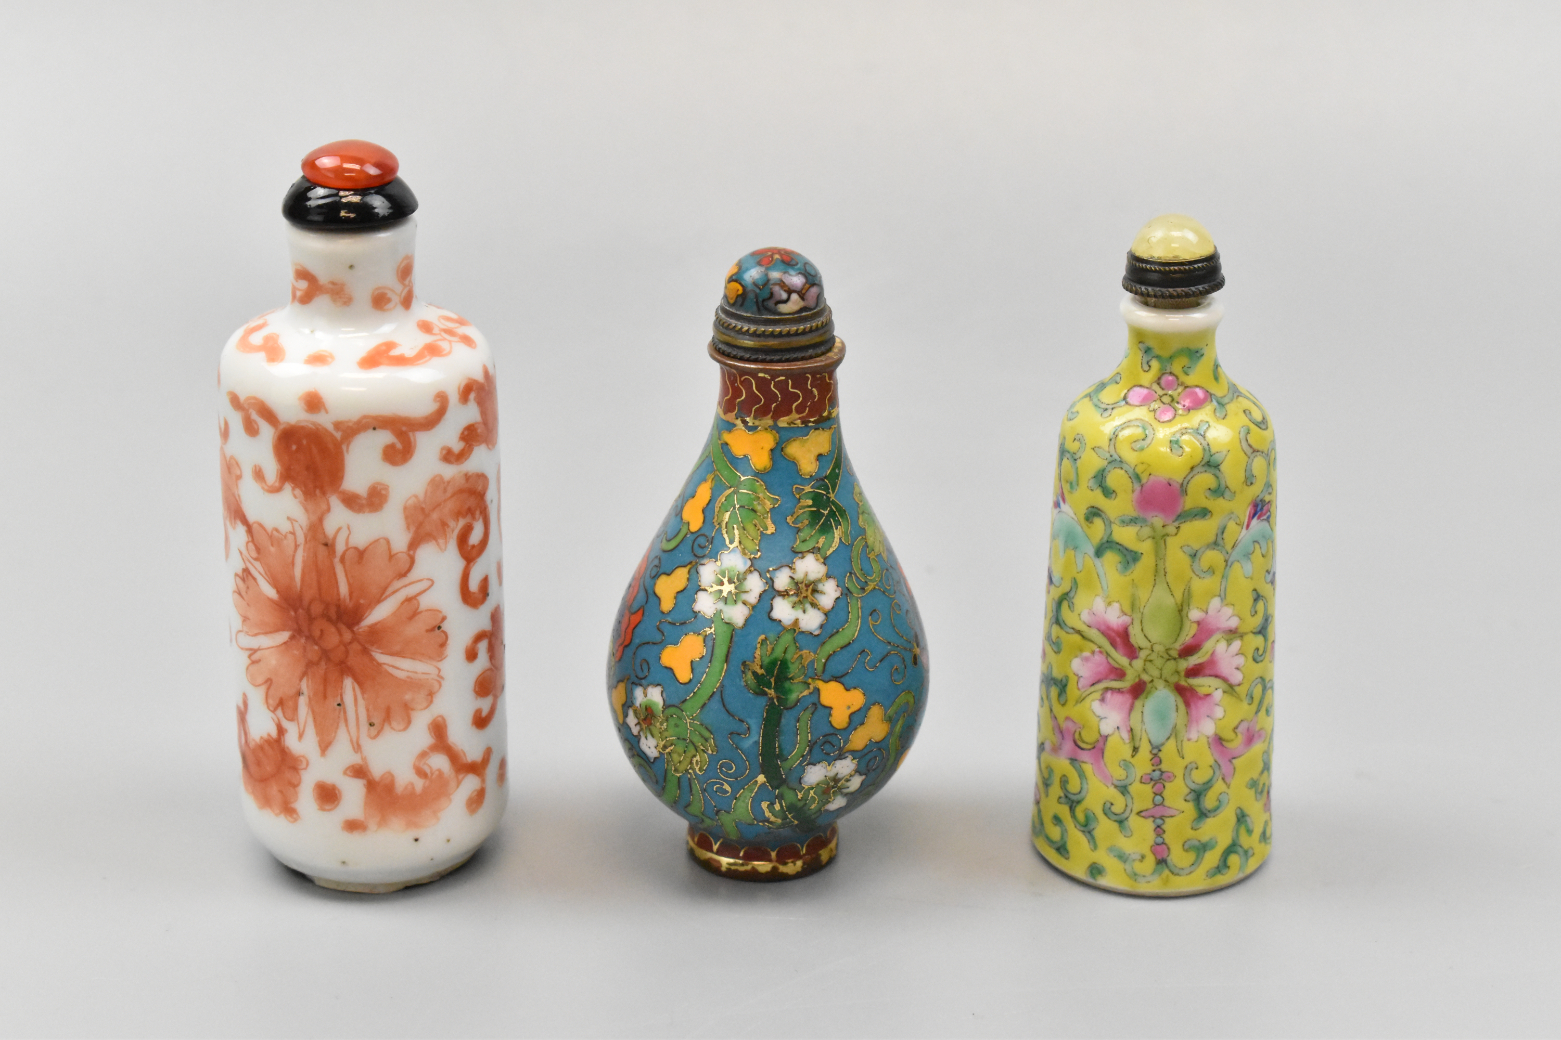 3 CHINESE SNUFF BOTTLE PORCELAIN 33a8c7